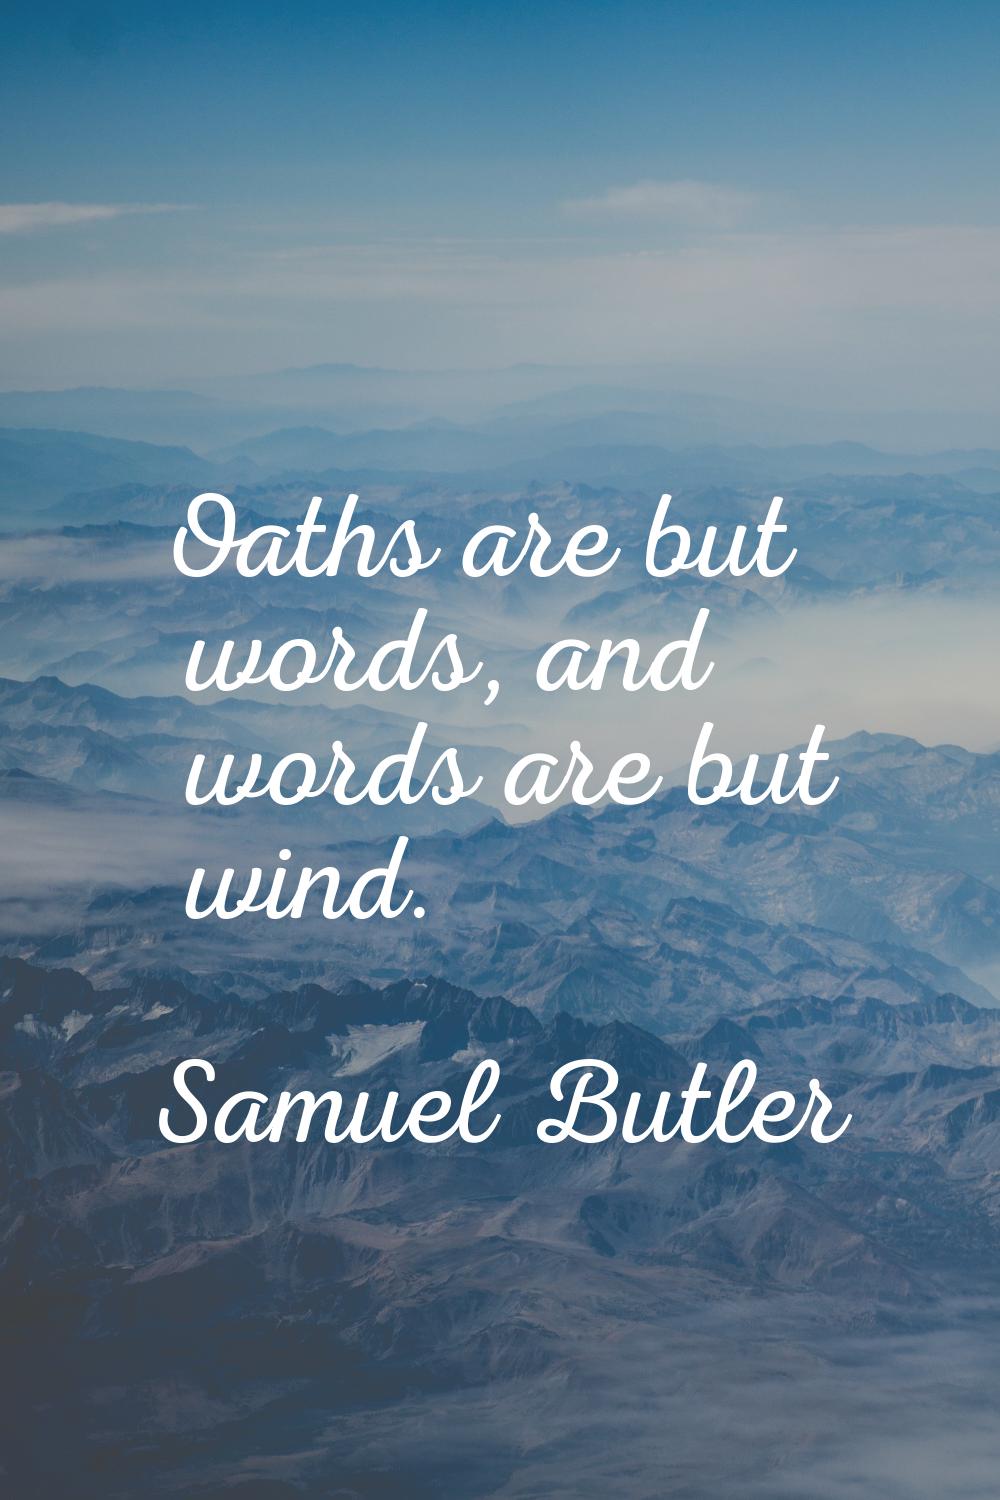 Oaths are but words, and words are but wind.